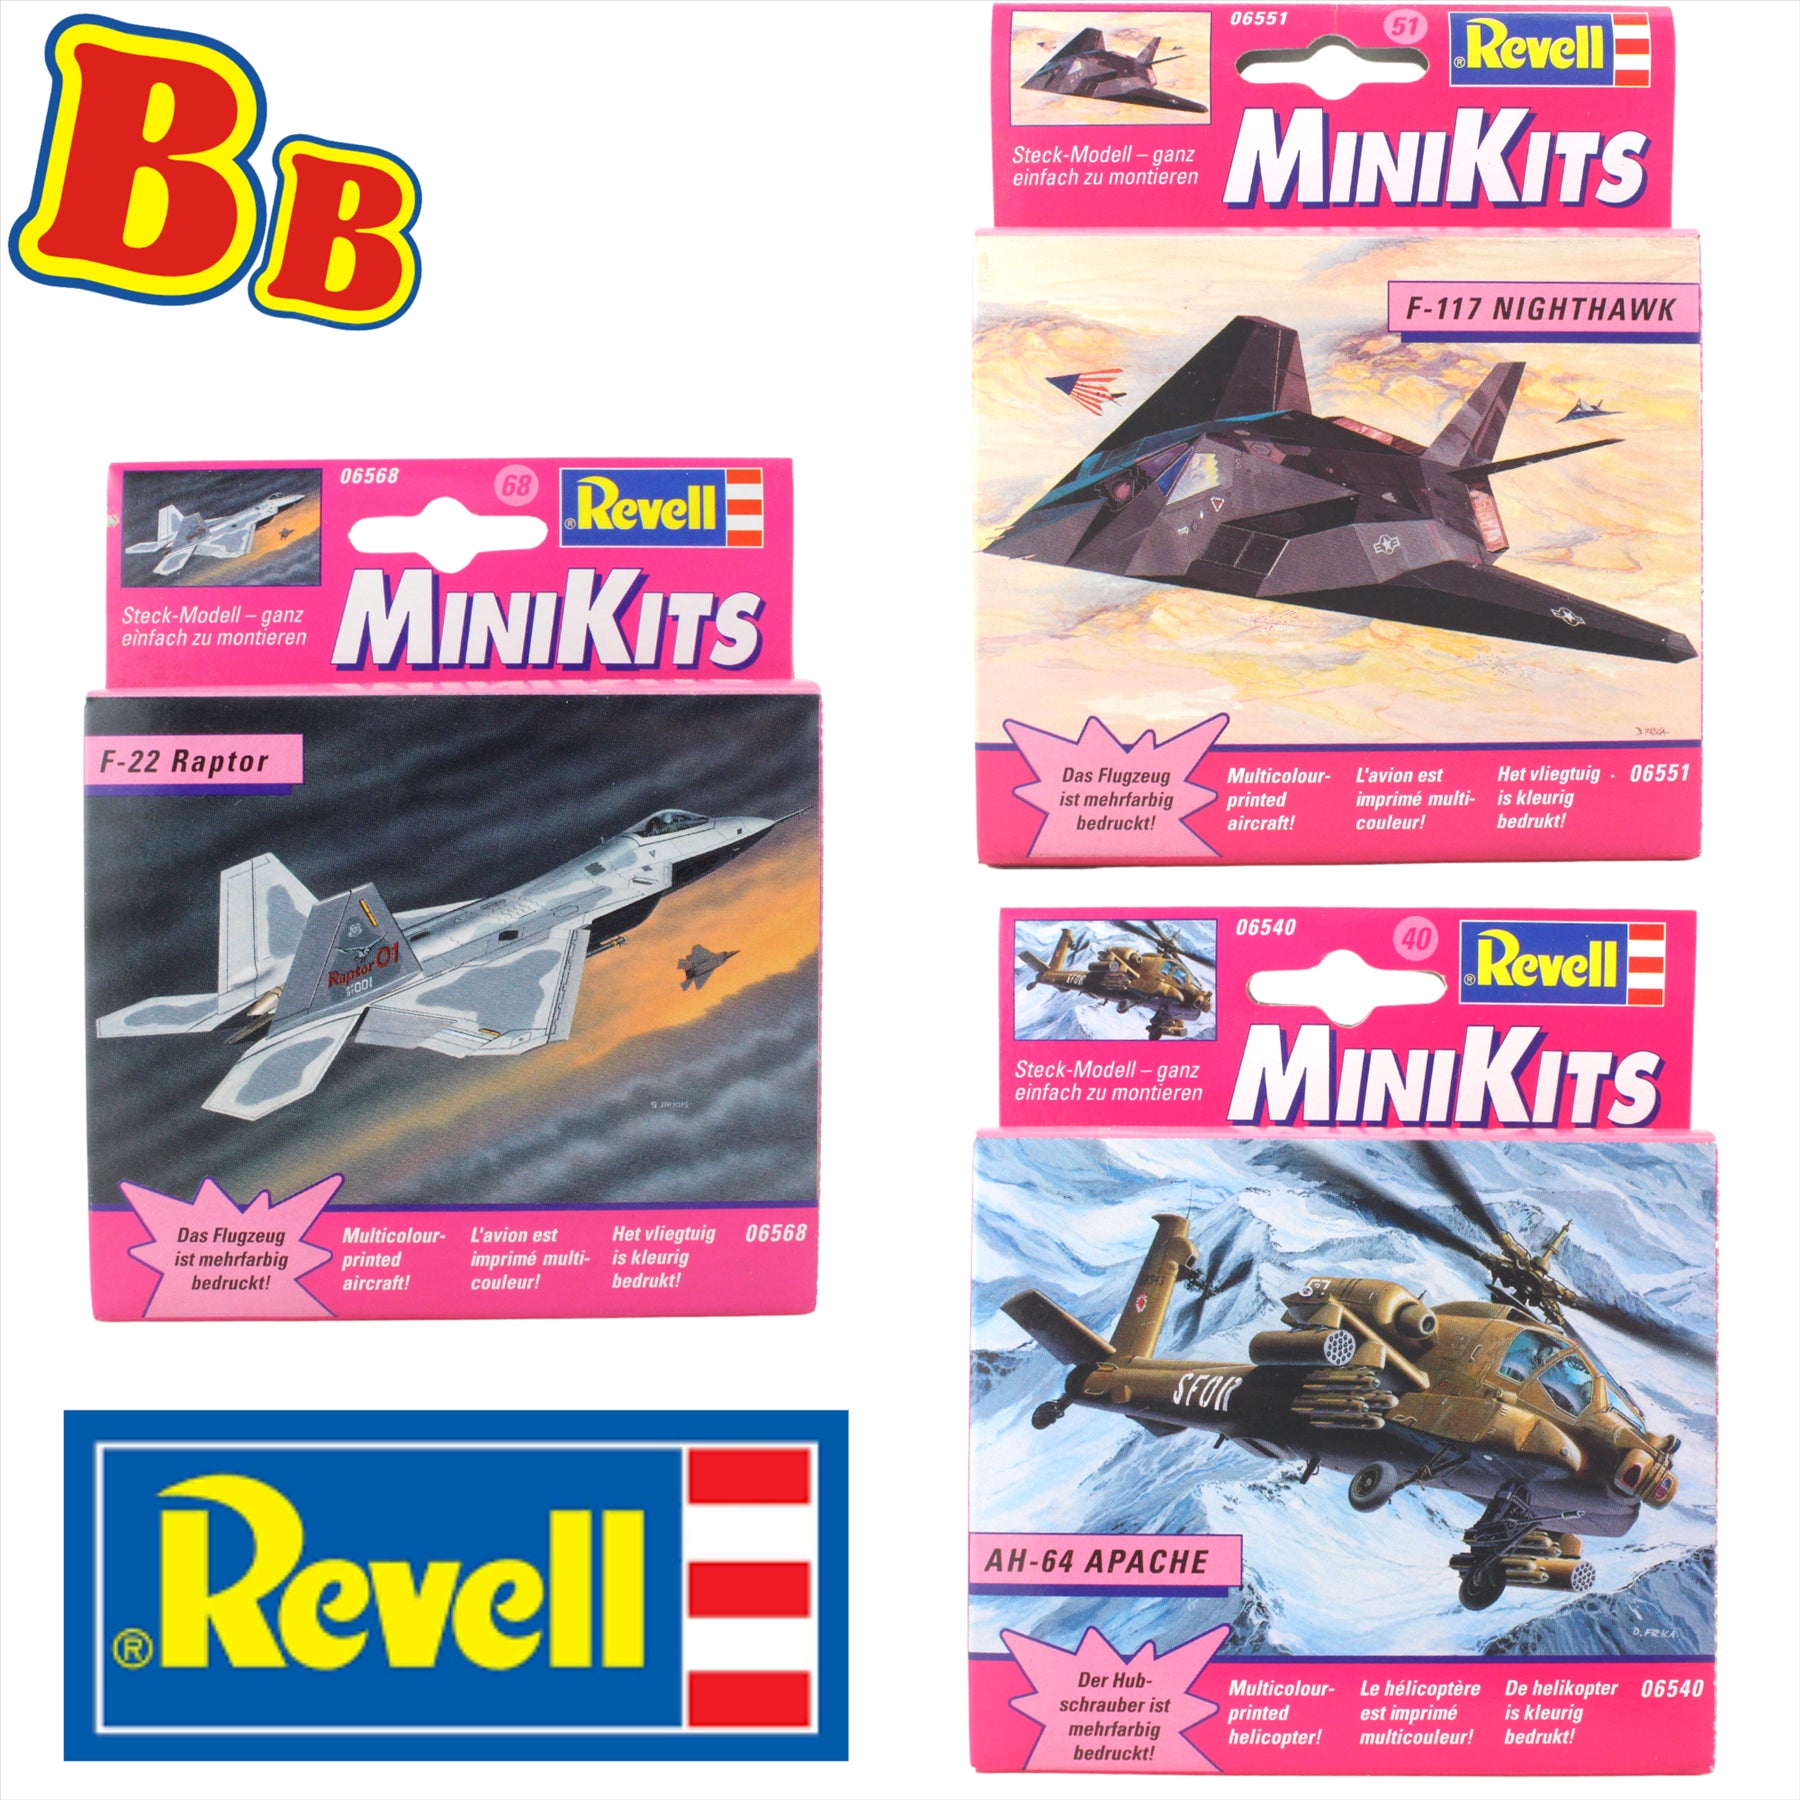 Revell MiniKits Model Plane Buildable Sets Pre Painted - Made in 2000 - F-117 Nighthawk, F-22 Raptor & AH-64 Apache - Set 4 - Pack of 3 - Toptoys2u